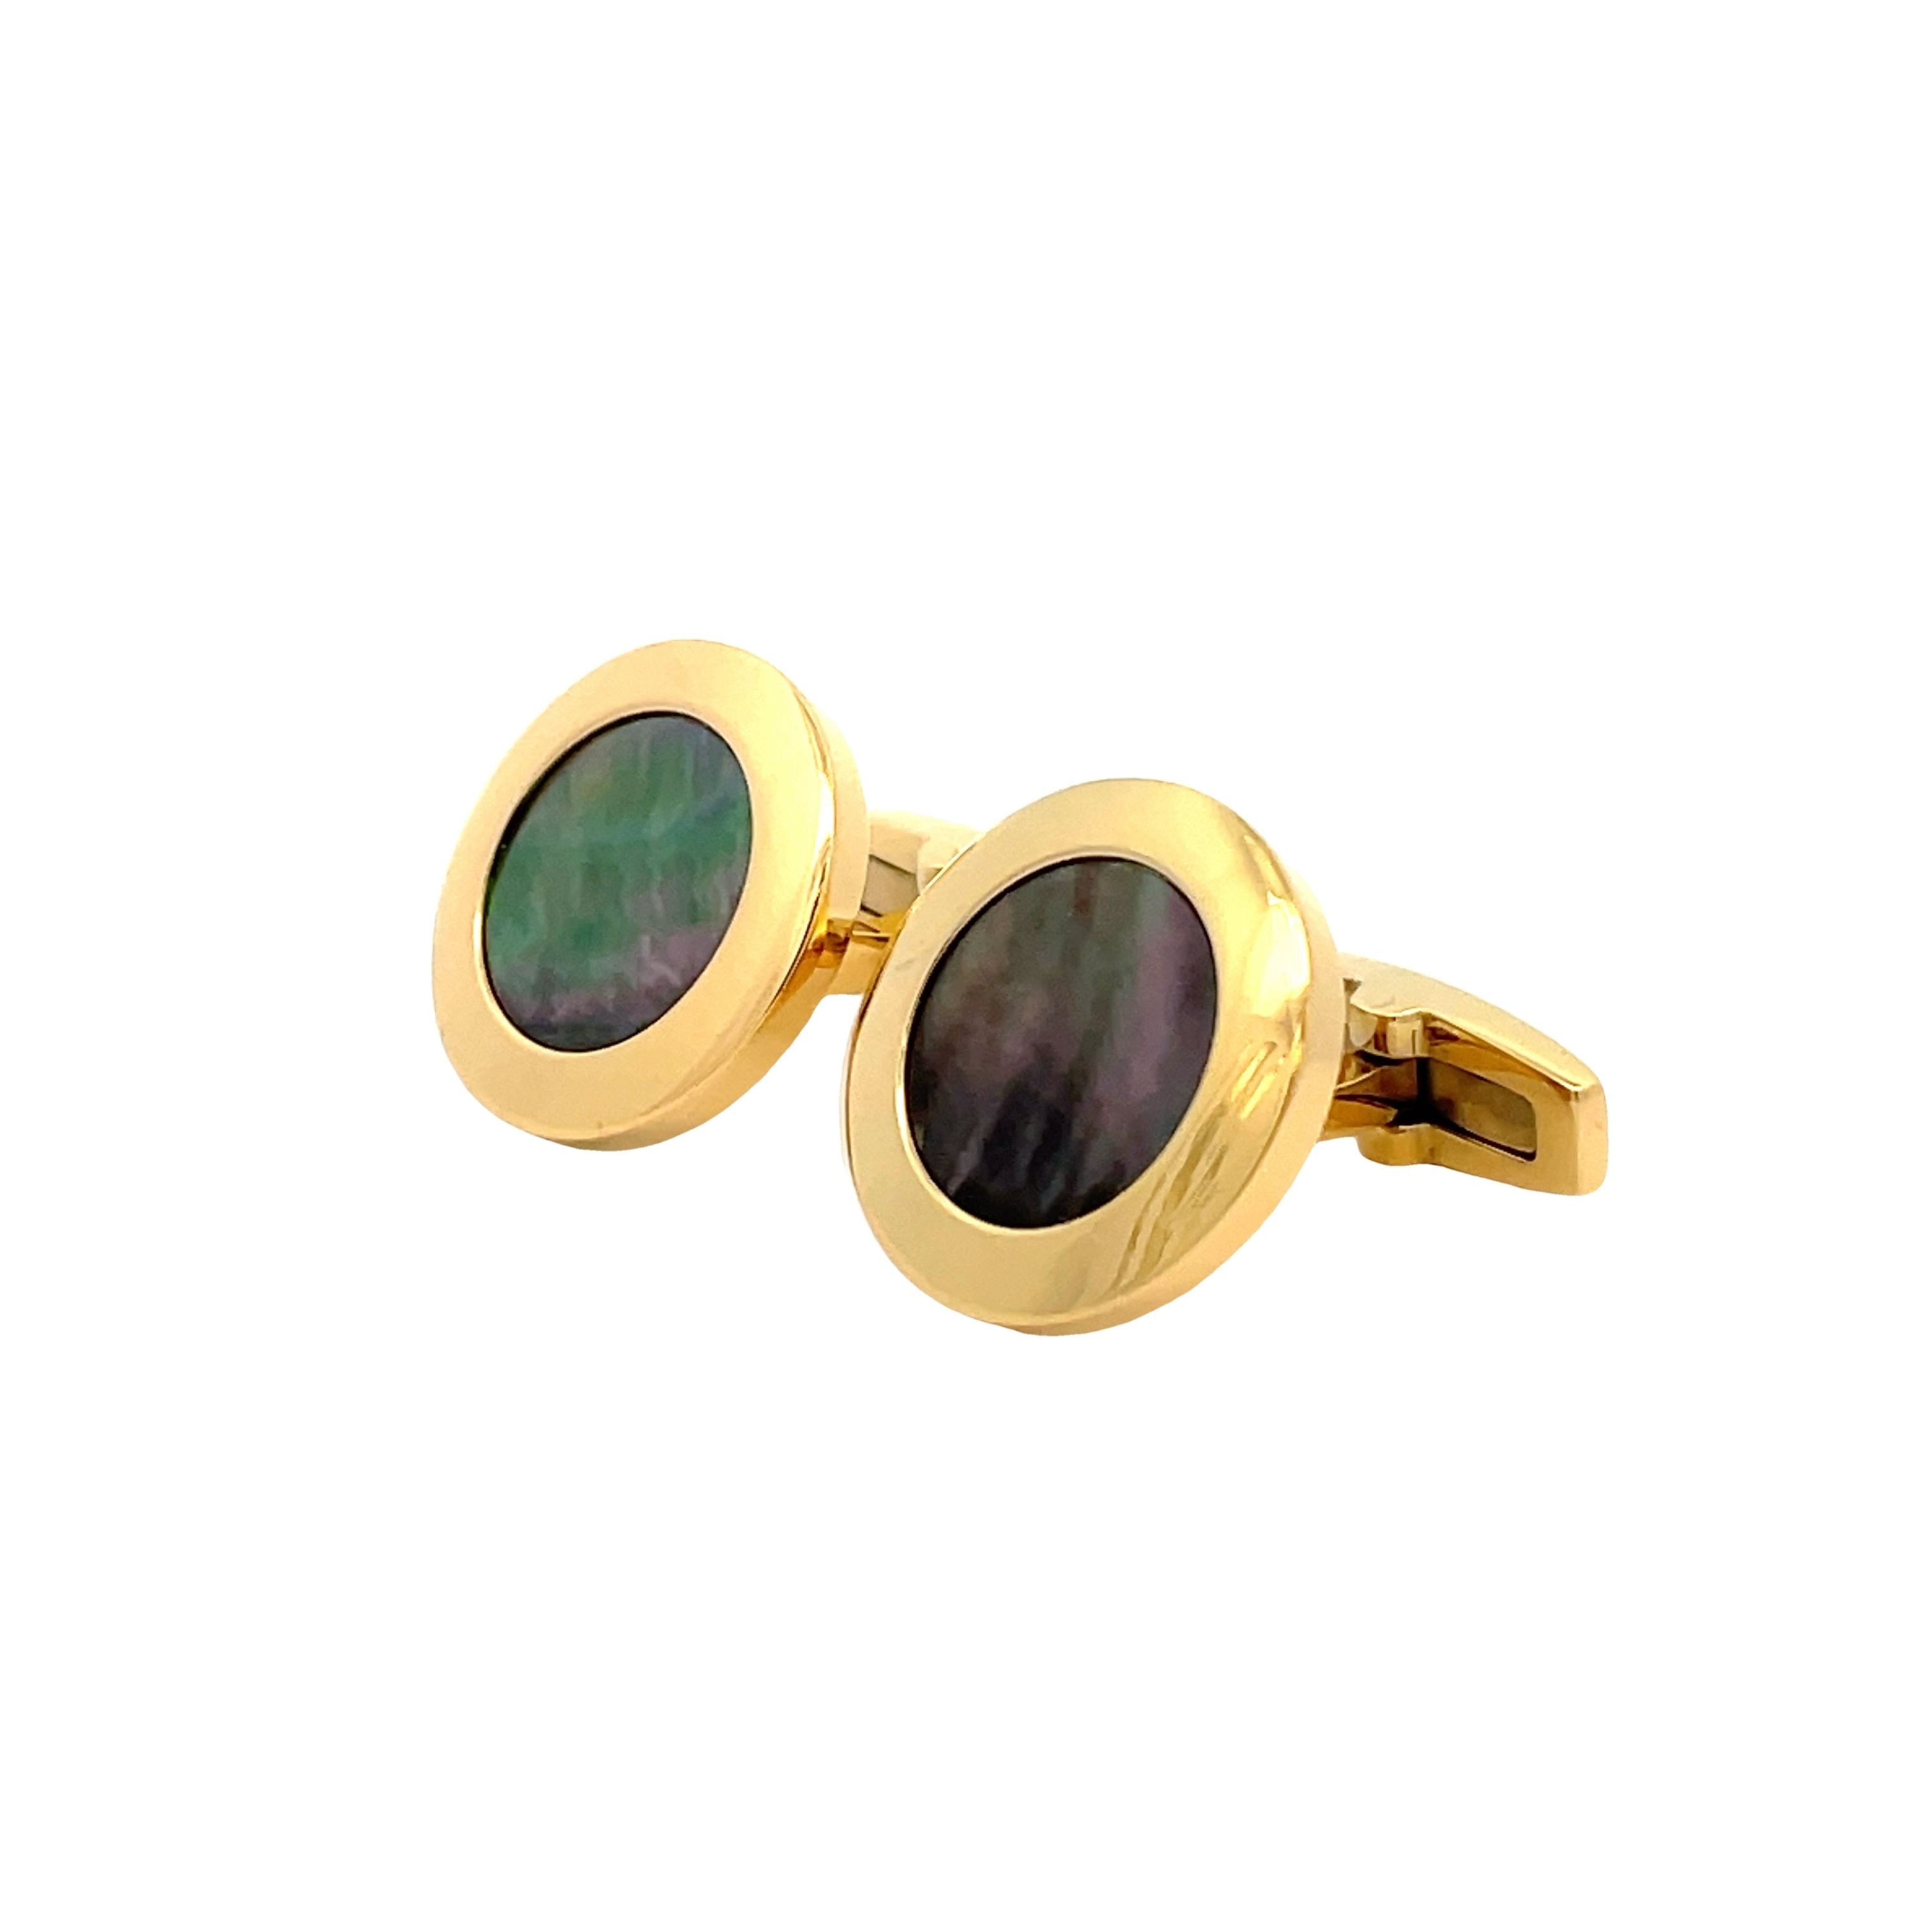 Gold Plated Stainless Steel Black Mother Of Pearl Round Cufflinks